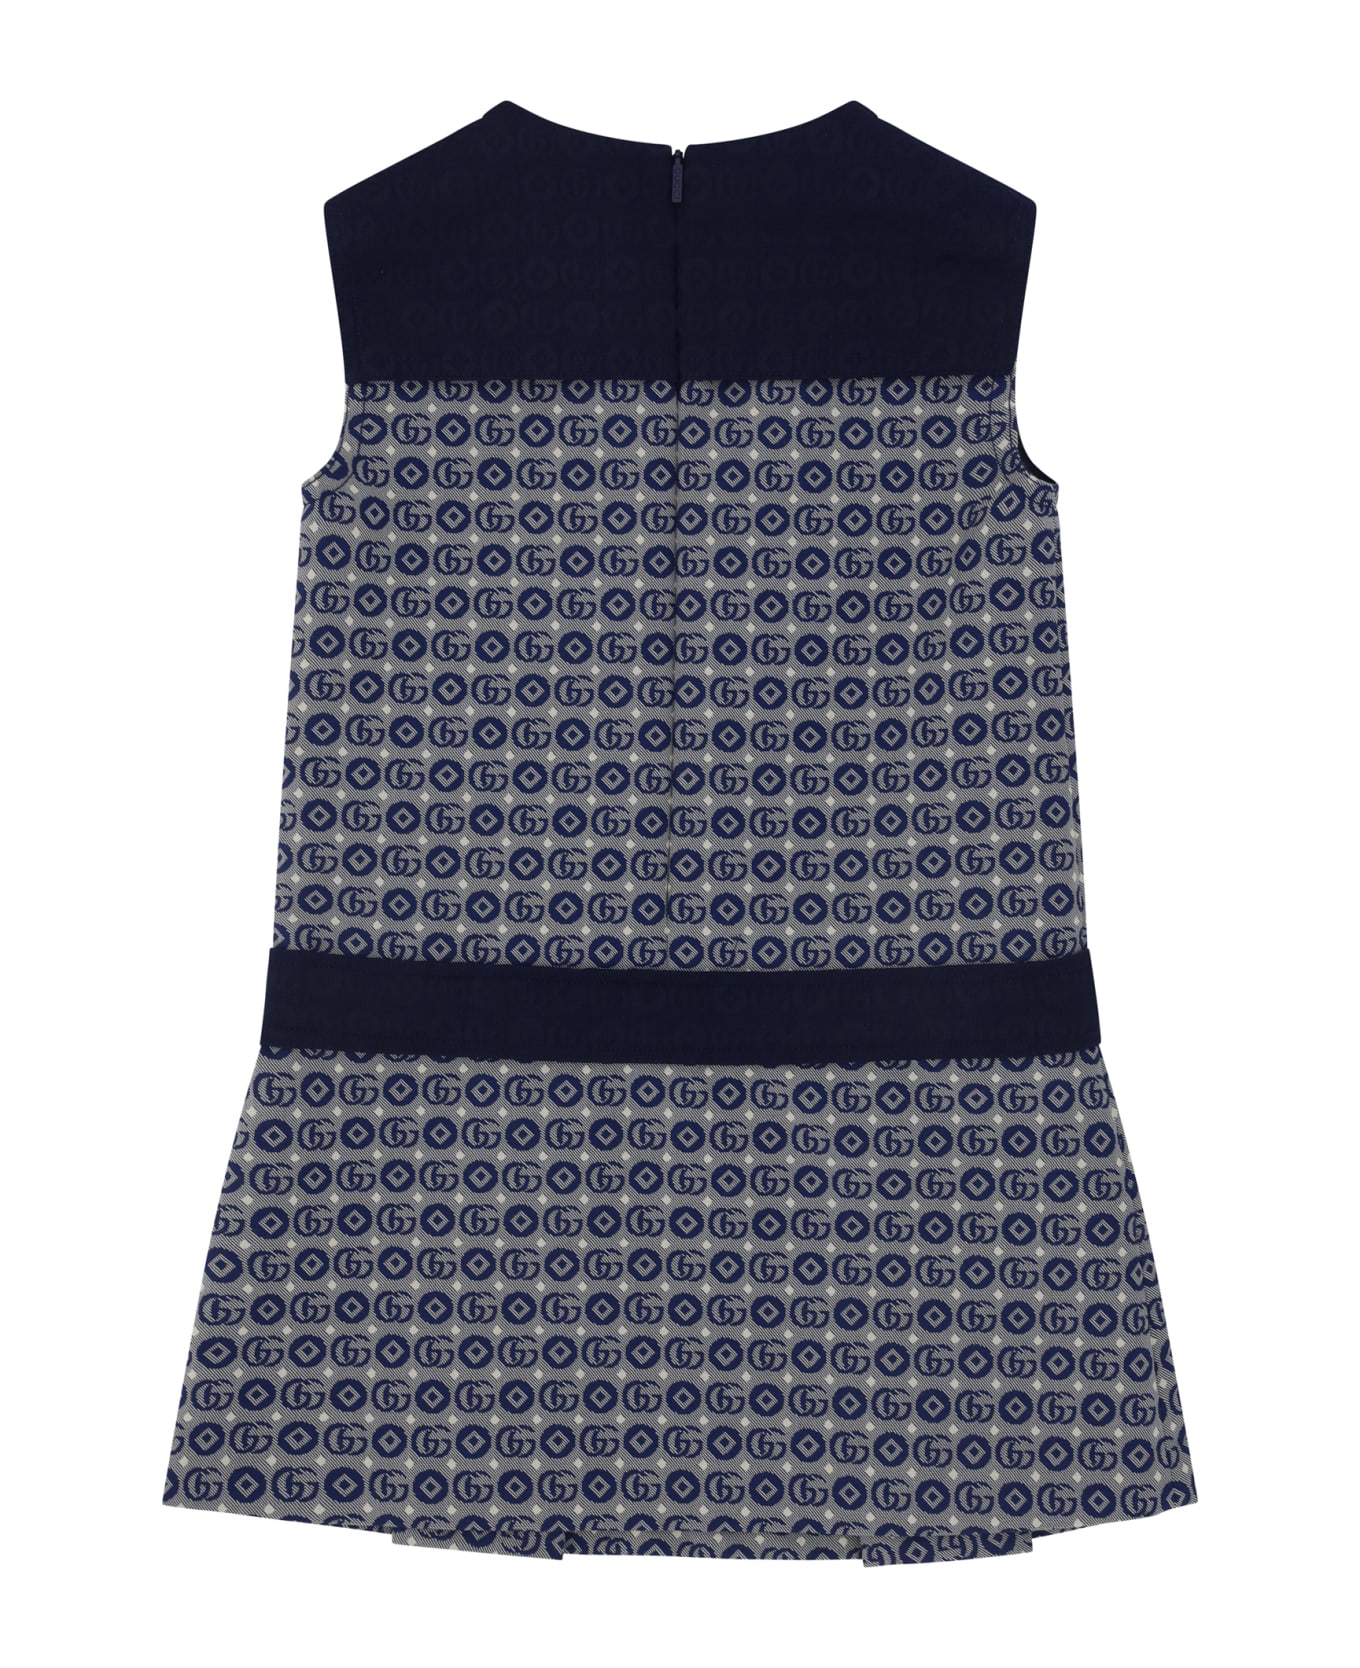 Gucci Dress For Girl - NAVY